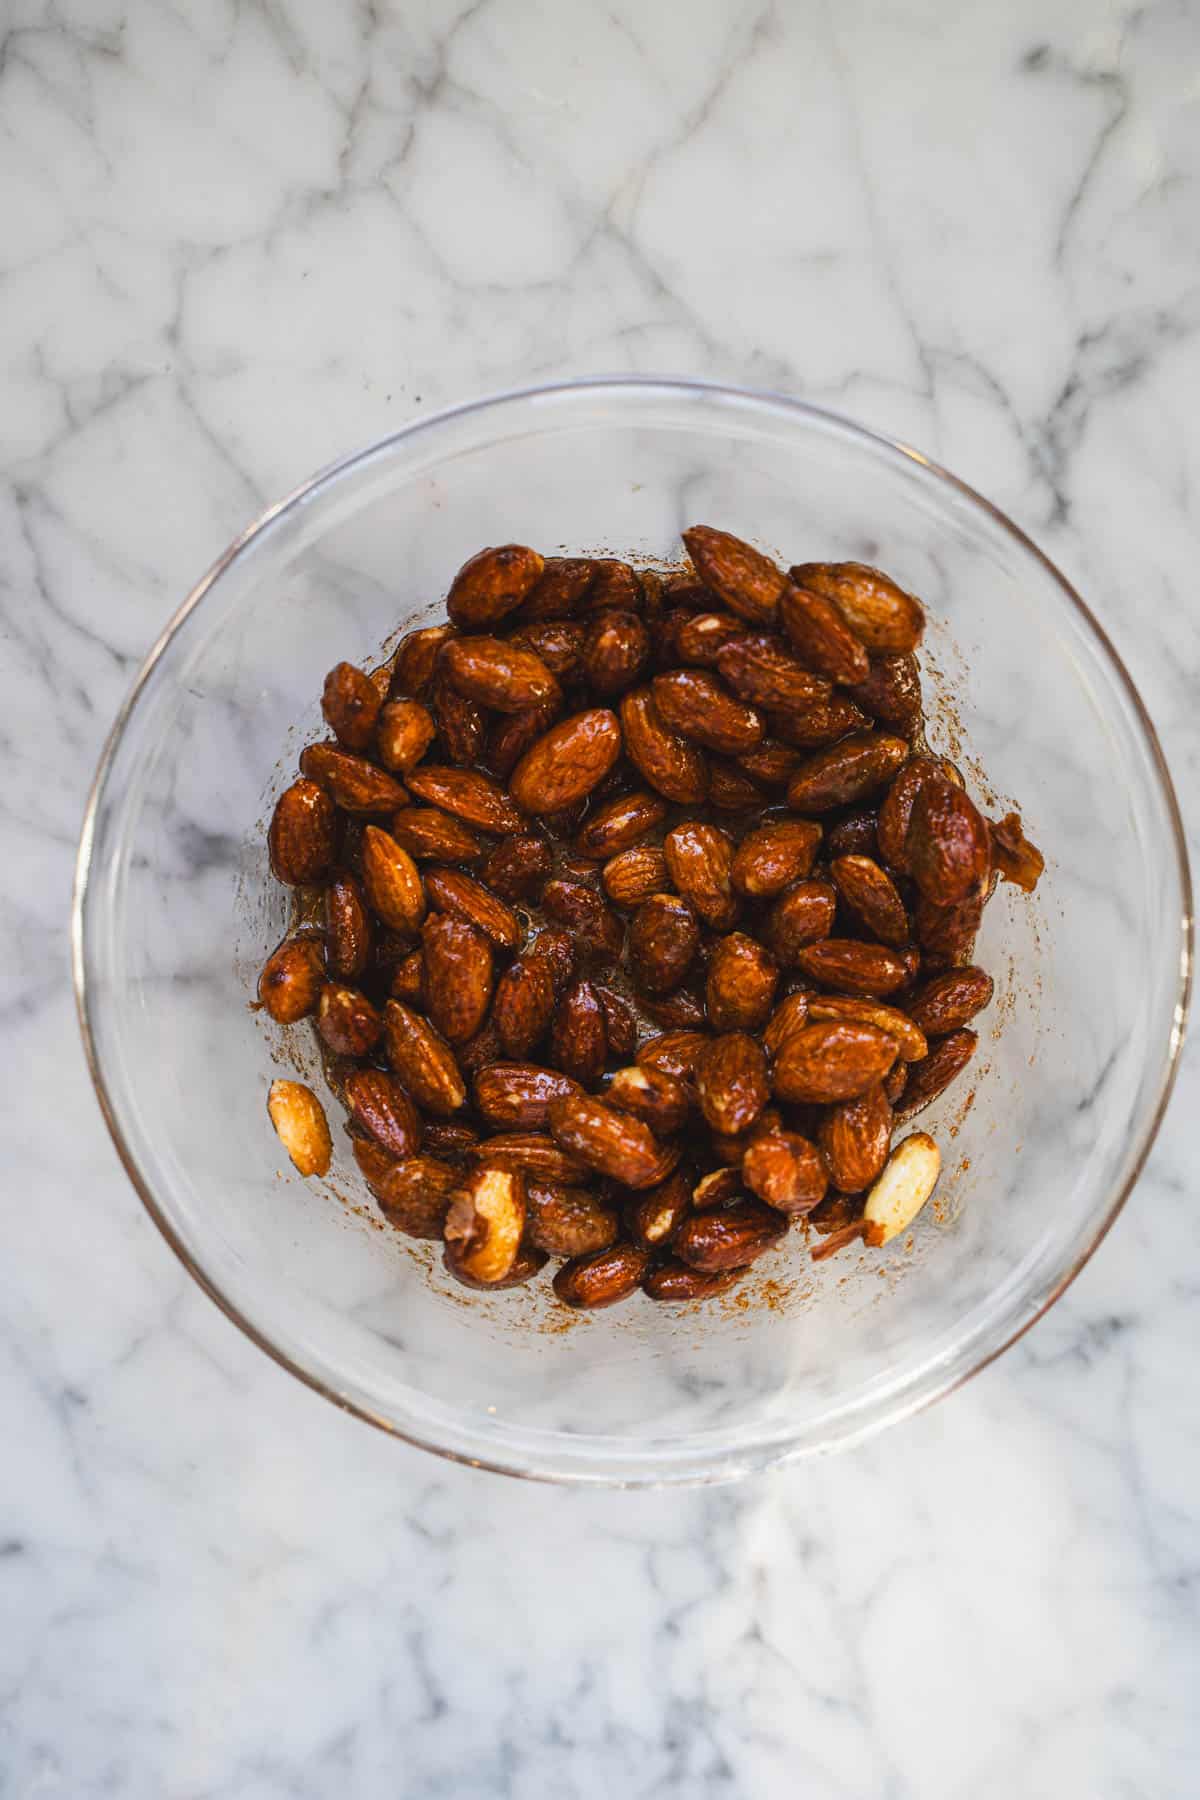 Nuts coated with spices in a glass bowl on a marble counter.